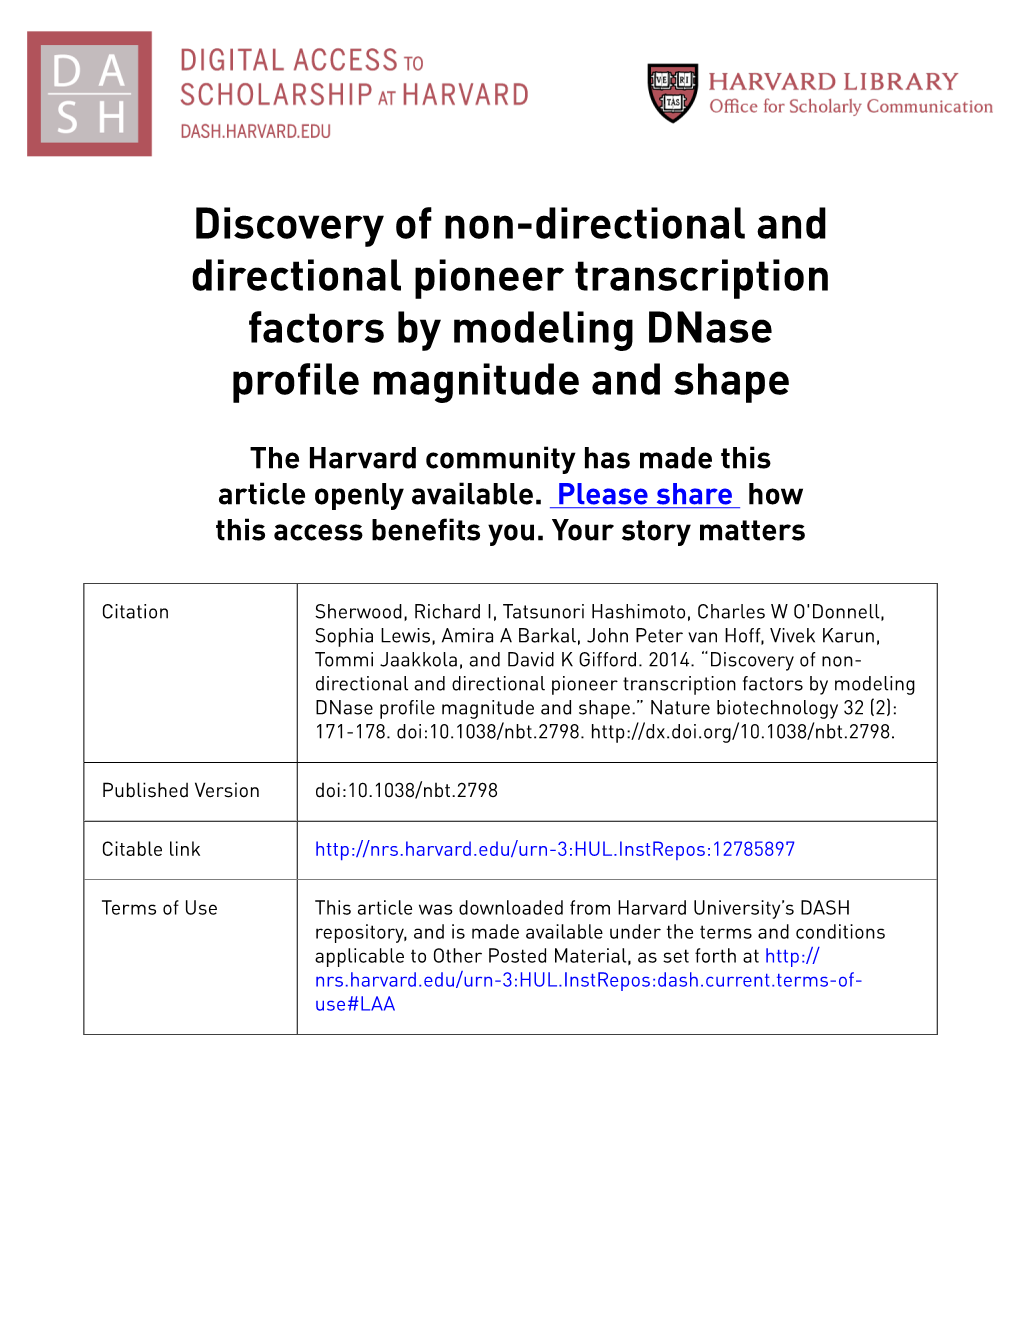 Discovery of Non-Directional and Directional Pioneer Transcription Factors by Modeling Dnase Profile Magnitude and Shape